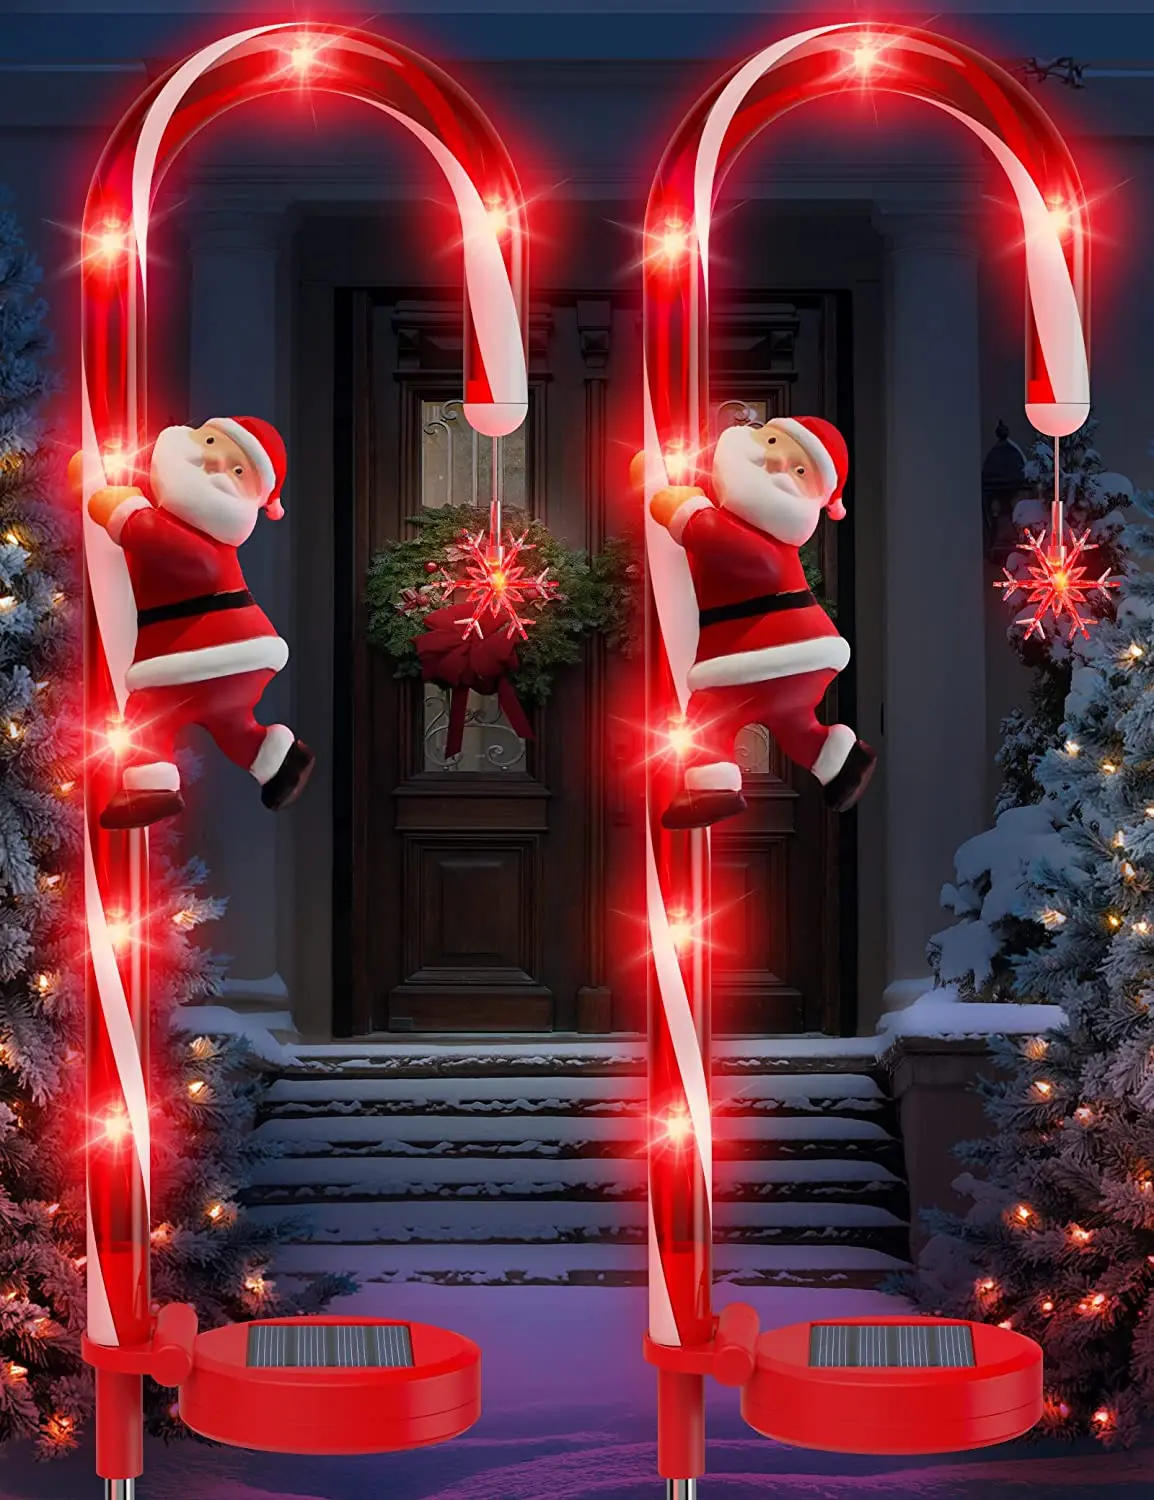 Christmas LED Solar Christmas Decoration Candy Cane Sign Lights Outdoor Stake Lights For Road Garden Lawn Lights Christmas Gifts customized wedding signs wedding neon signs wedding decoration lights waterproof neon sign